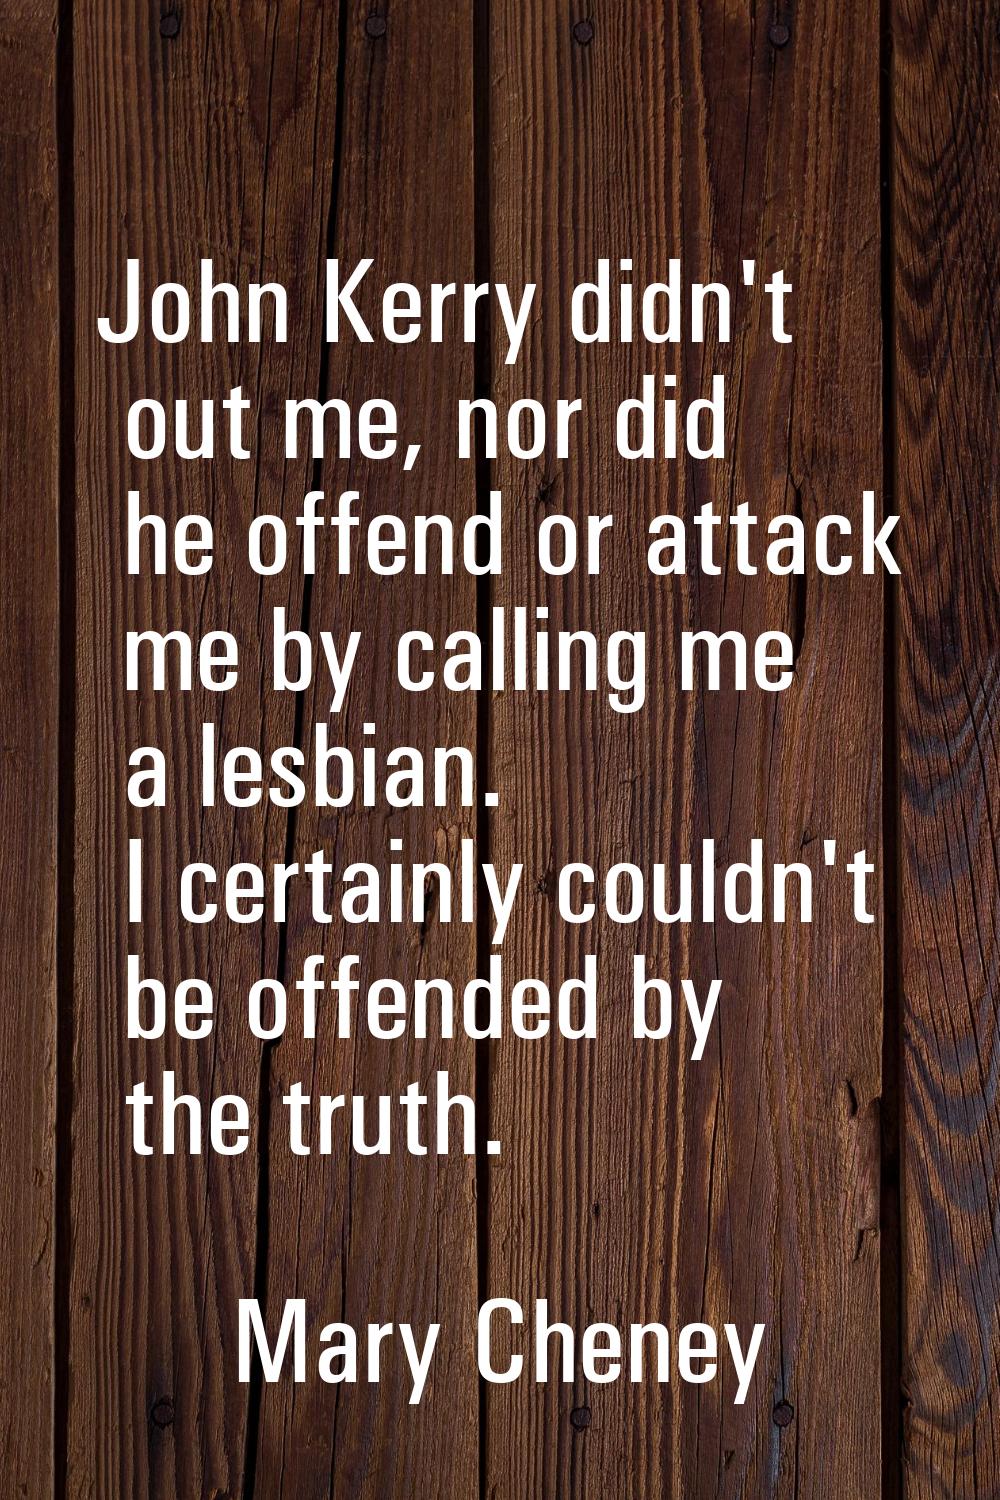 John Kerry didn't out me, nor did he offend or attack me by calling me a lesbian. I certainly could